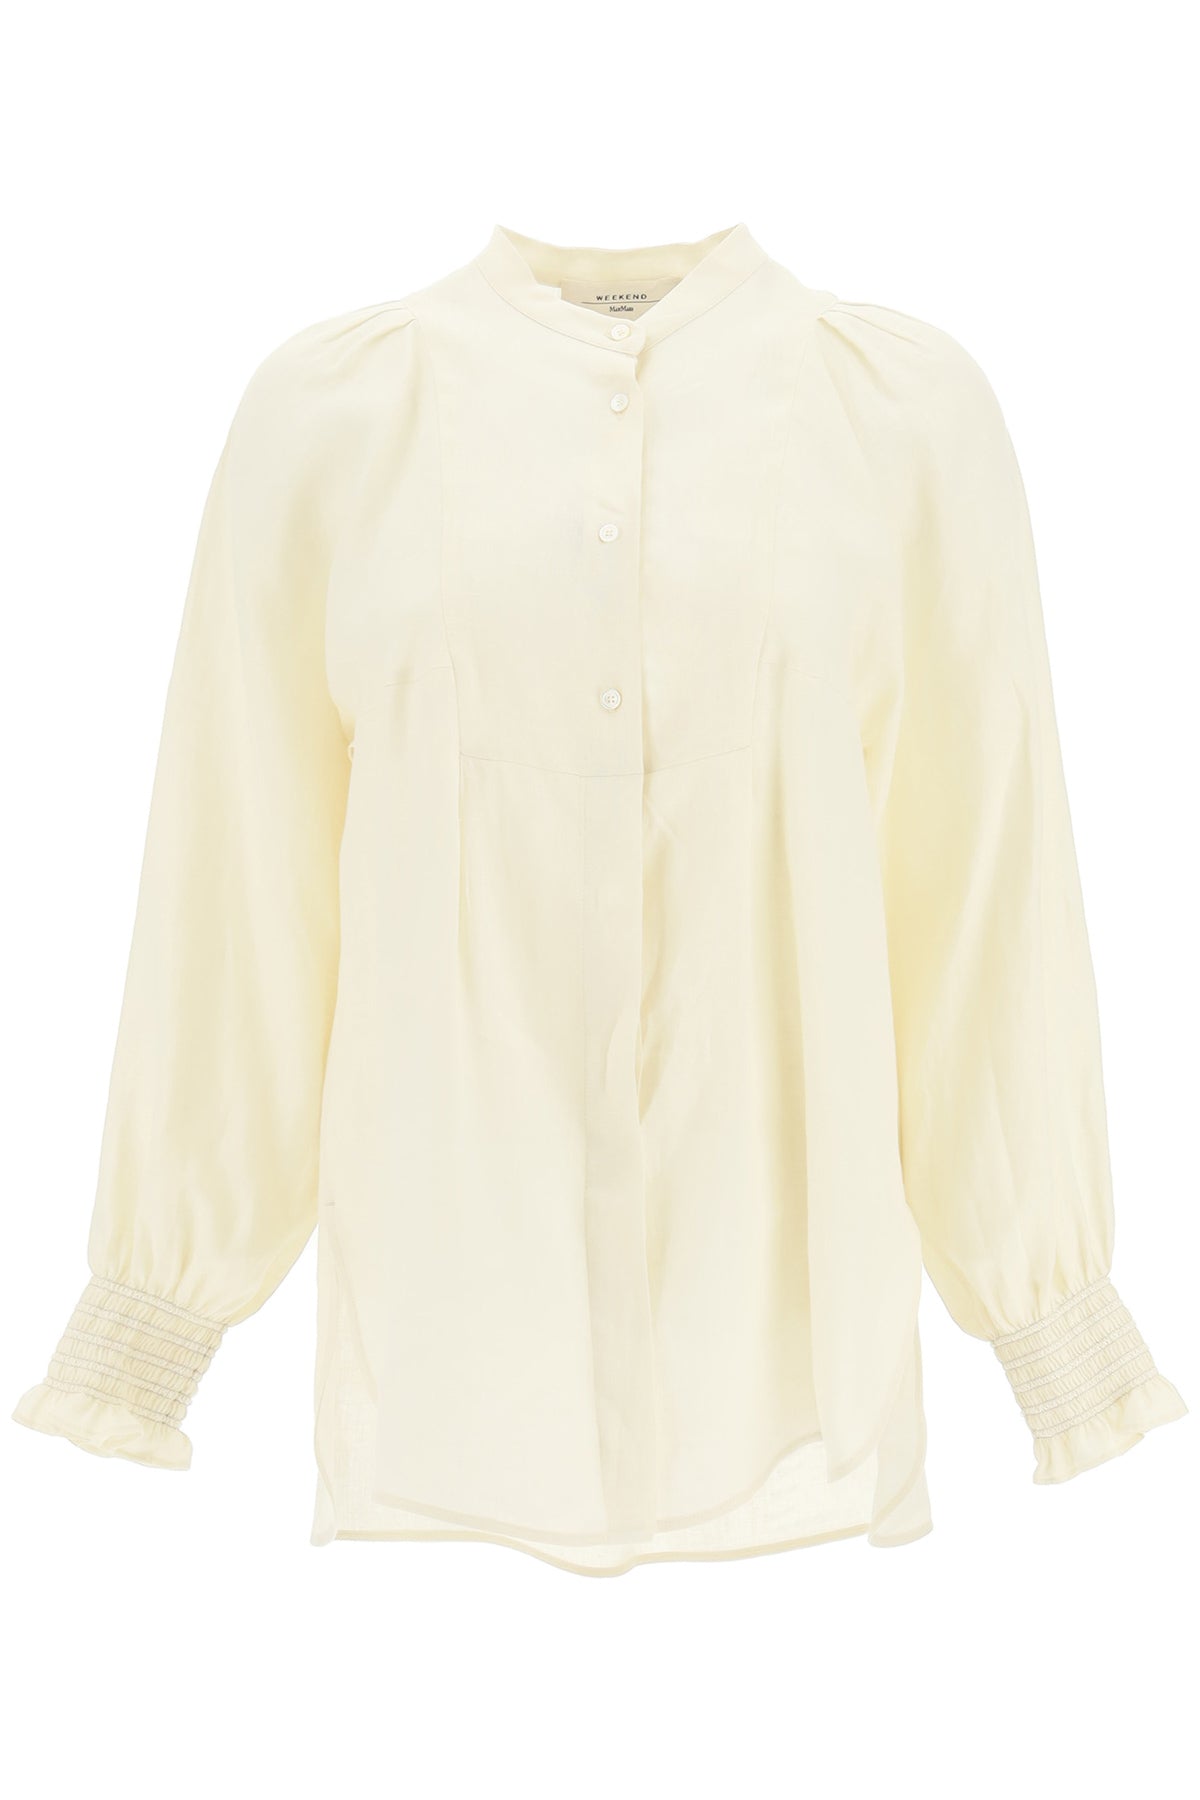 Weekend Max Mara Oversized Linen Shirt With Smocked Cuffs In White ...